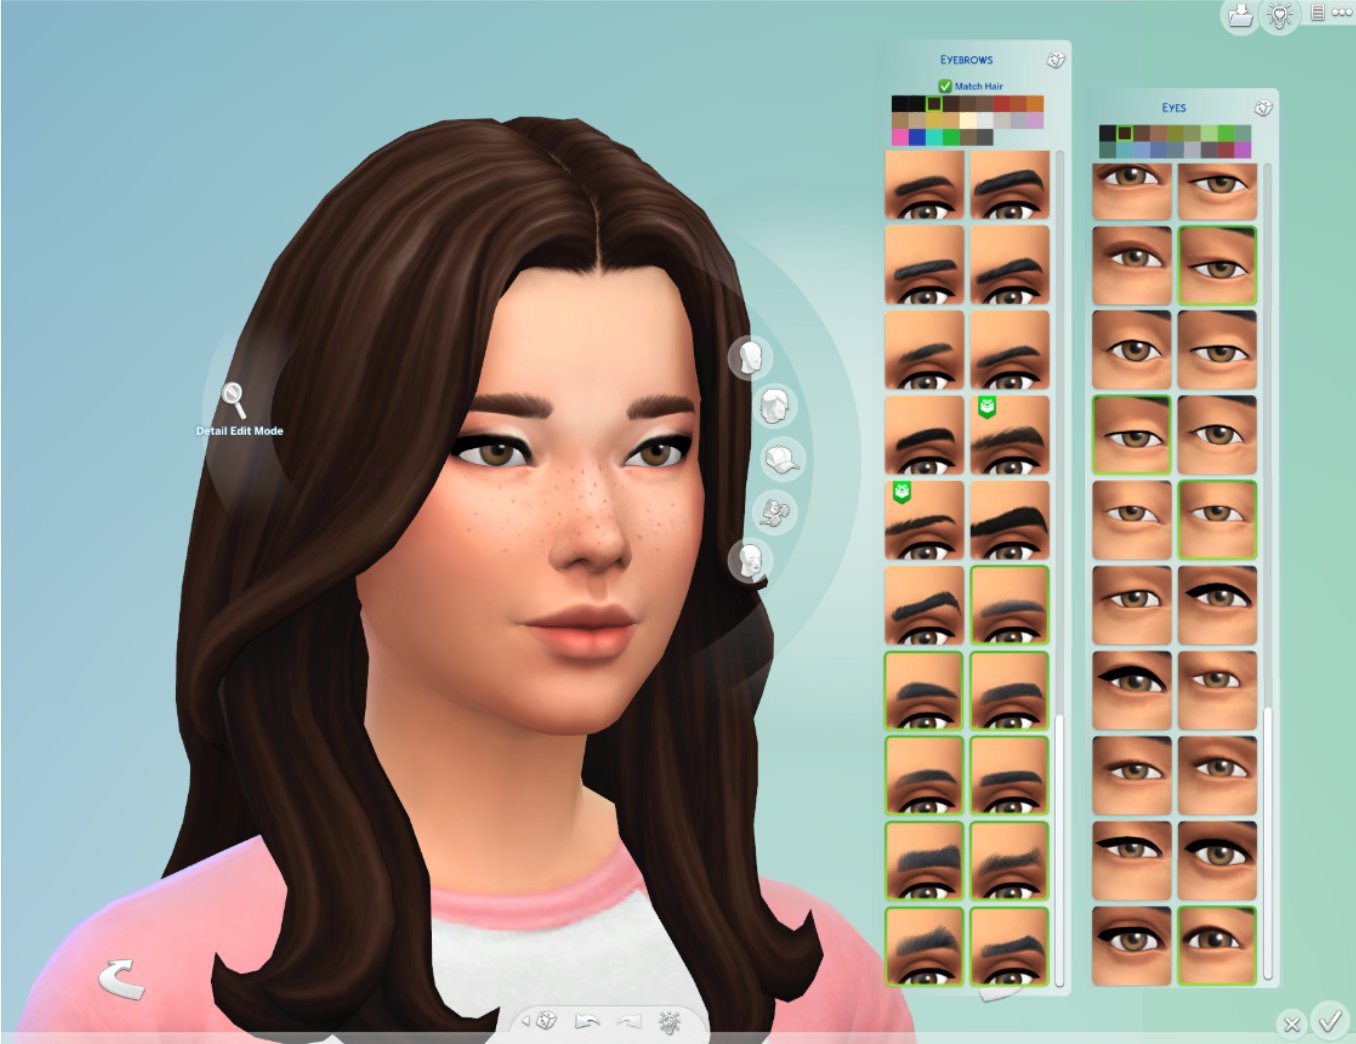 The Sims 4 adds more options for East Asian character creation – AsAmNews